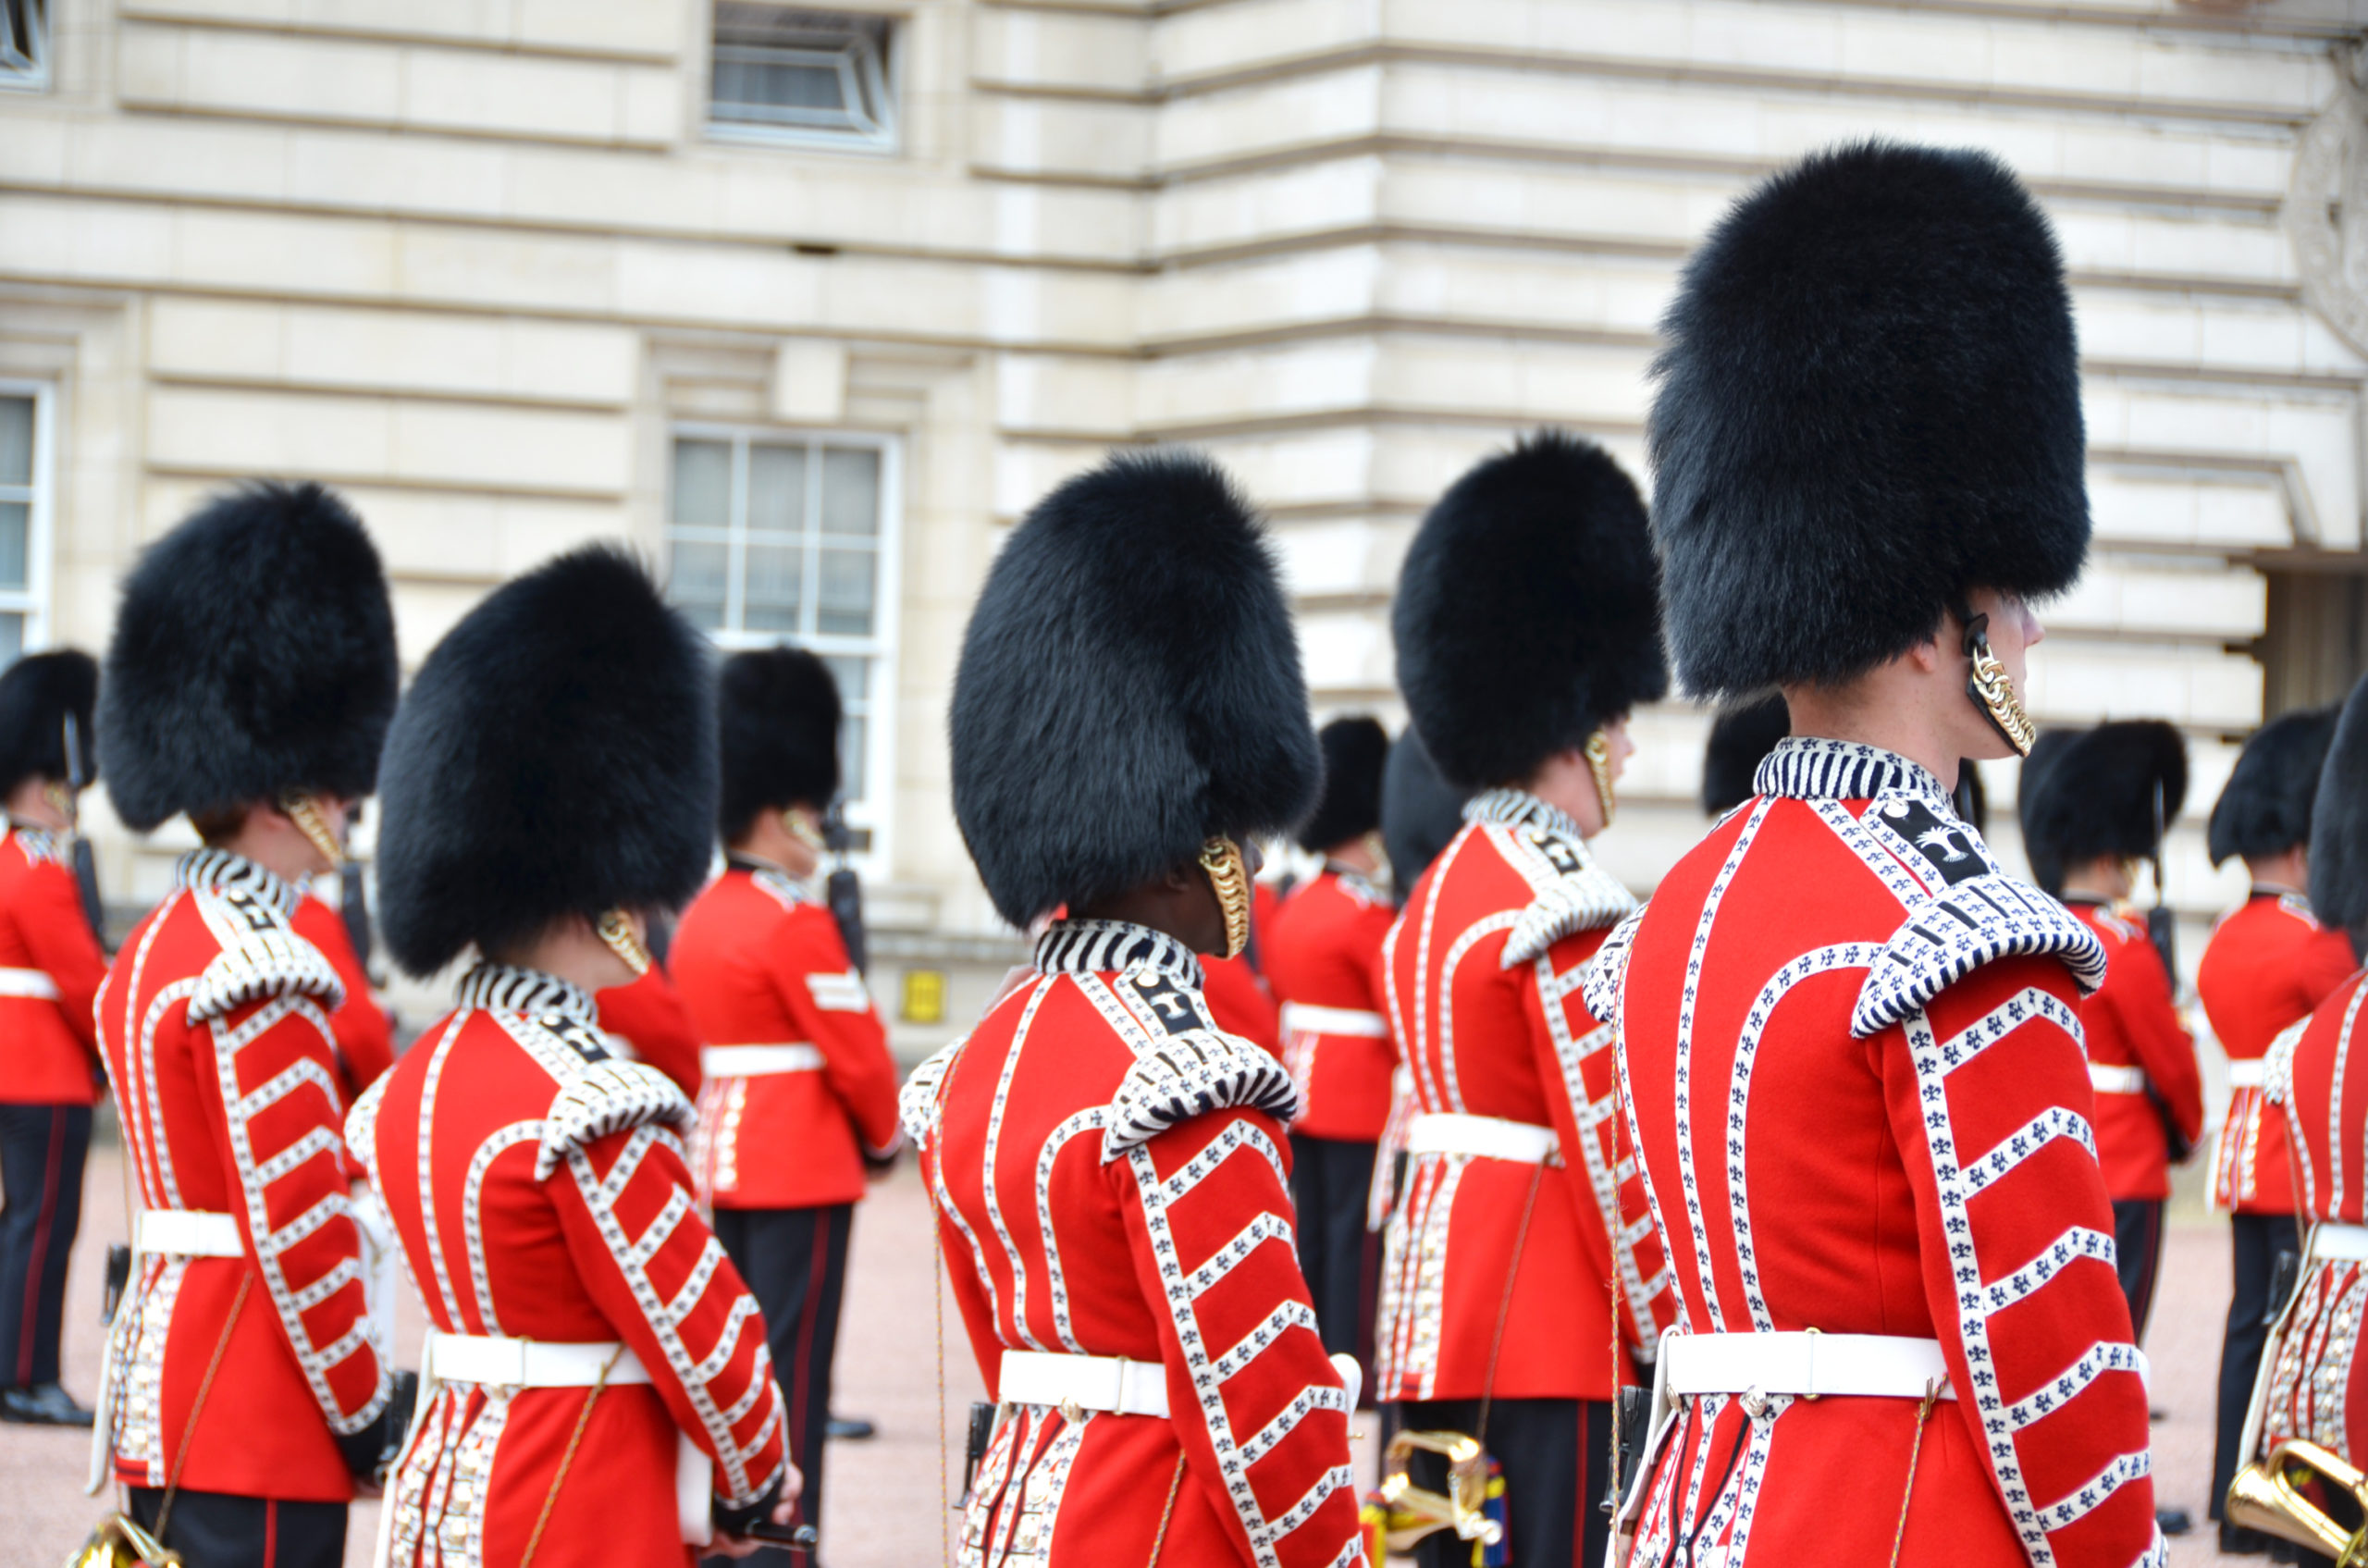 LONDON, UK – JUNE 12, 2014: British Royal guards perform the Changing of the Guard in Buckingham Palace